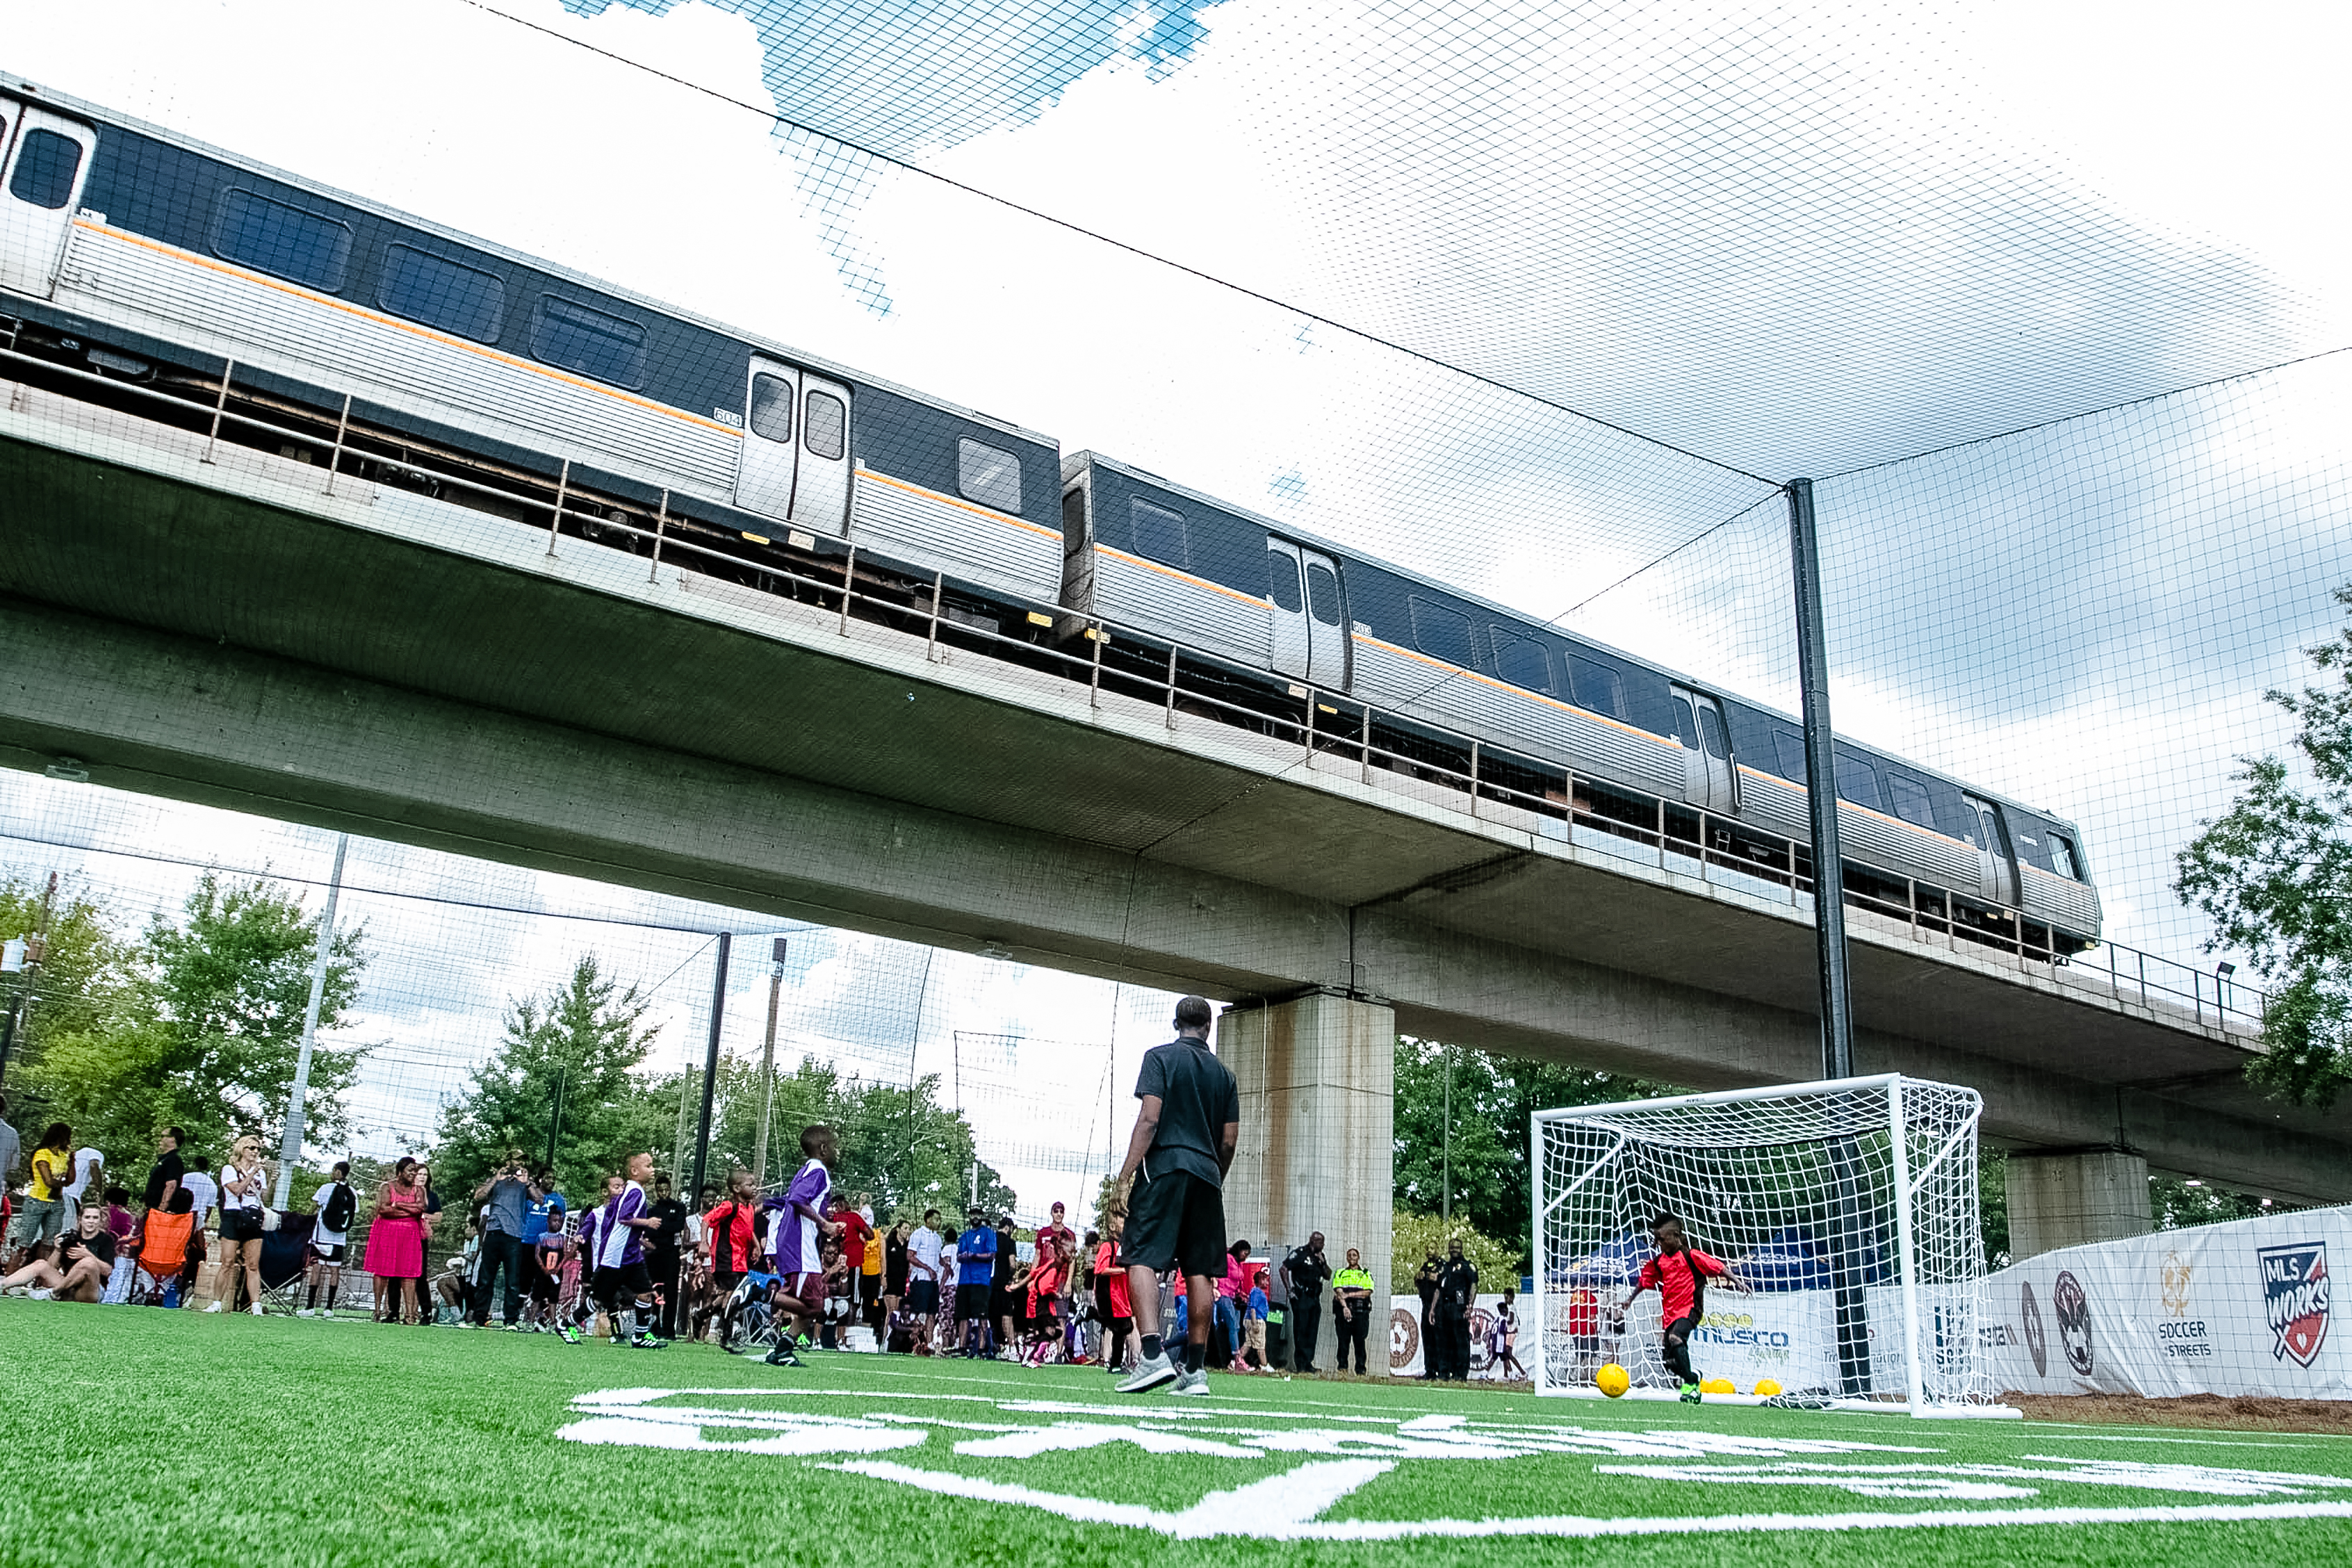 A youth soccer game played at the opening of StationSoccer-West End. A train can be seen above the field.